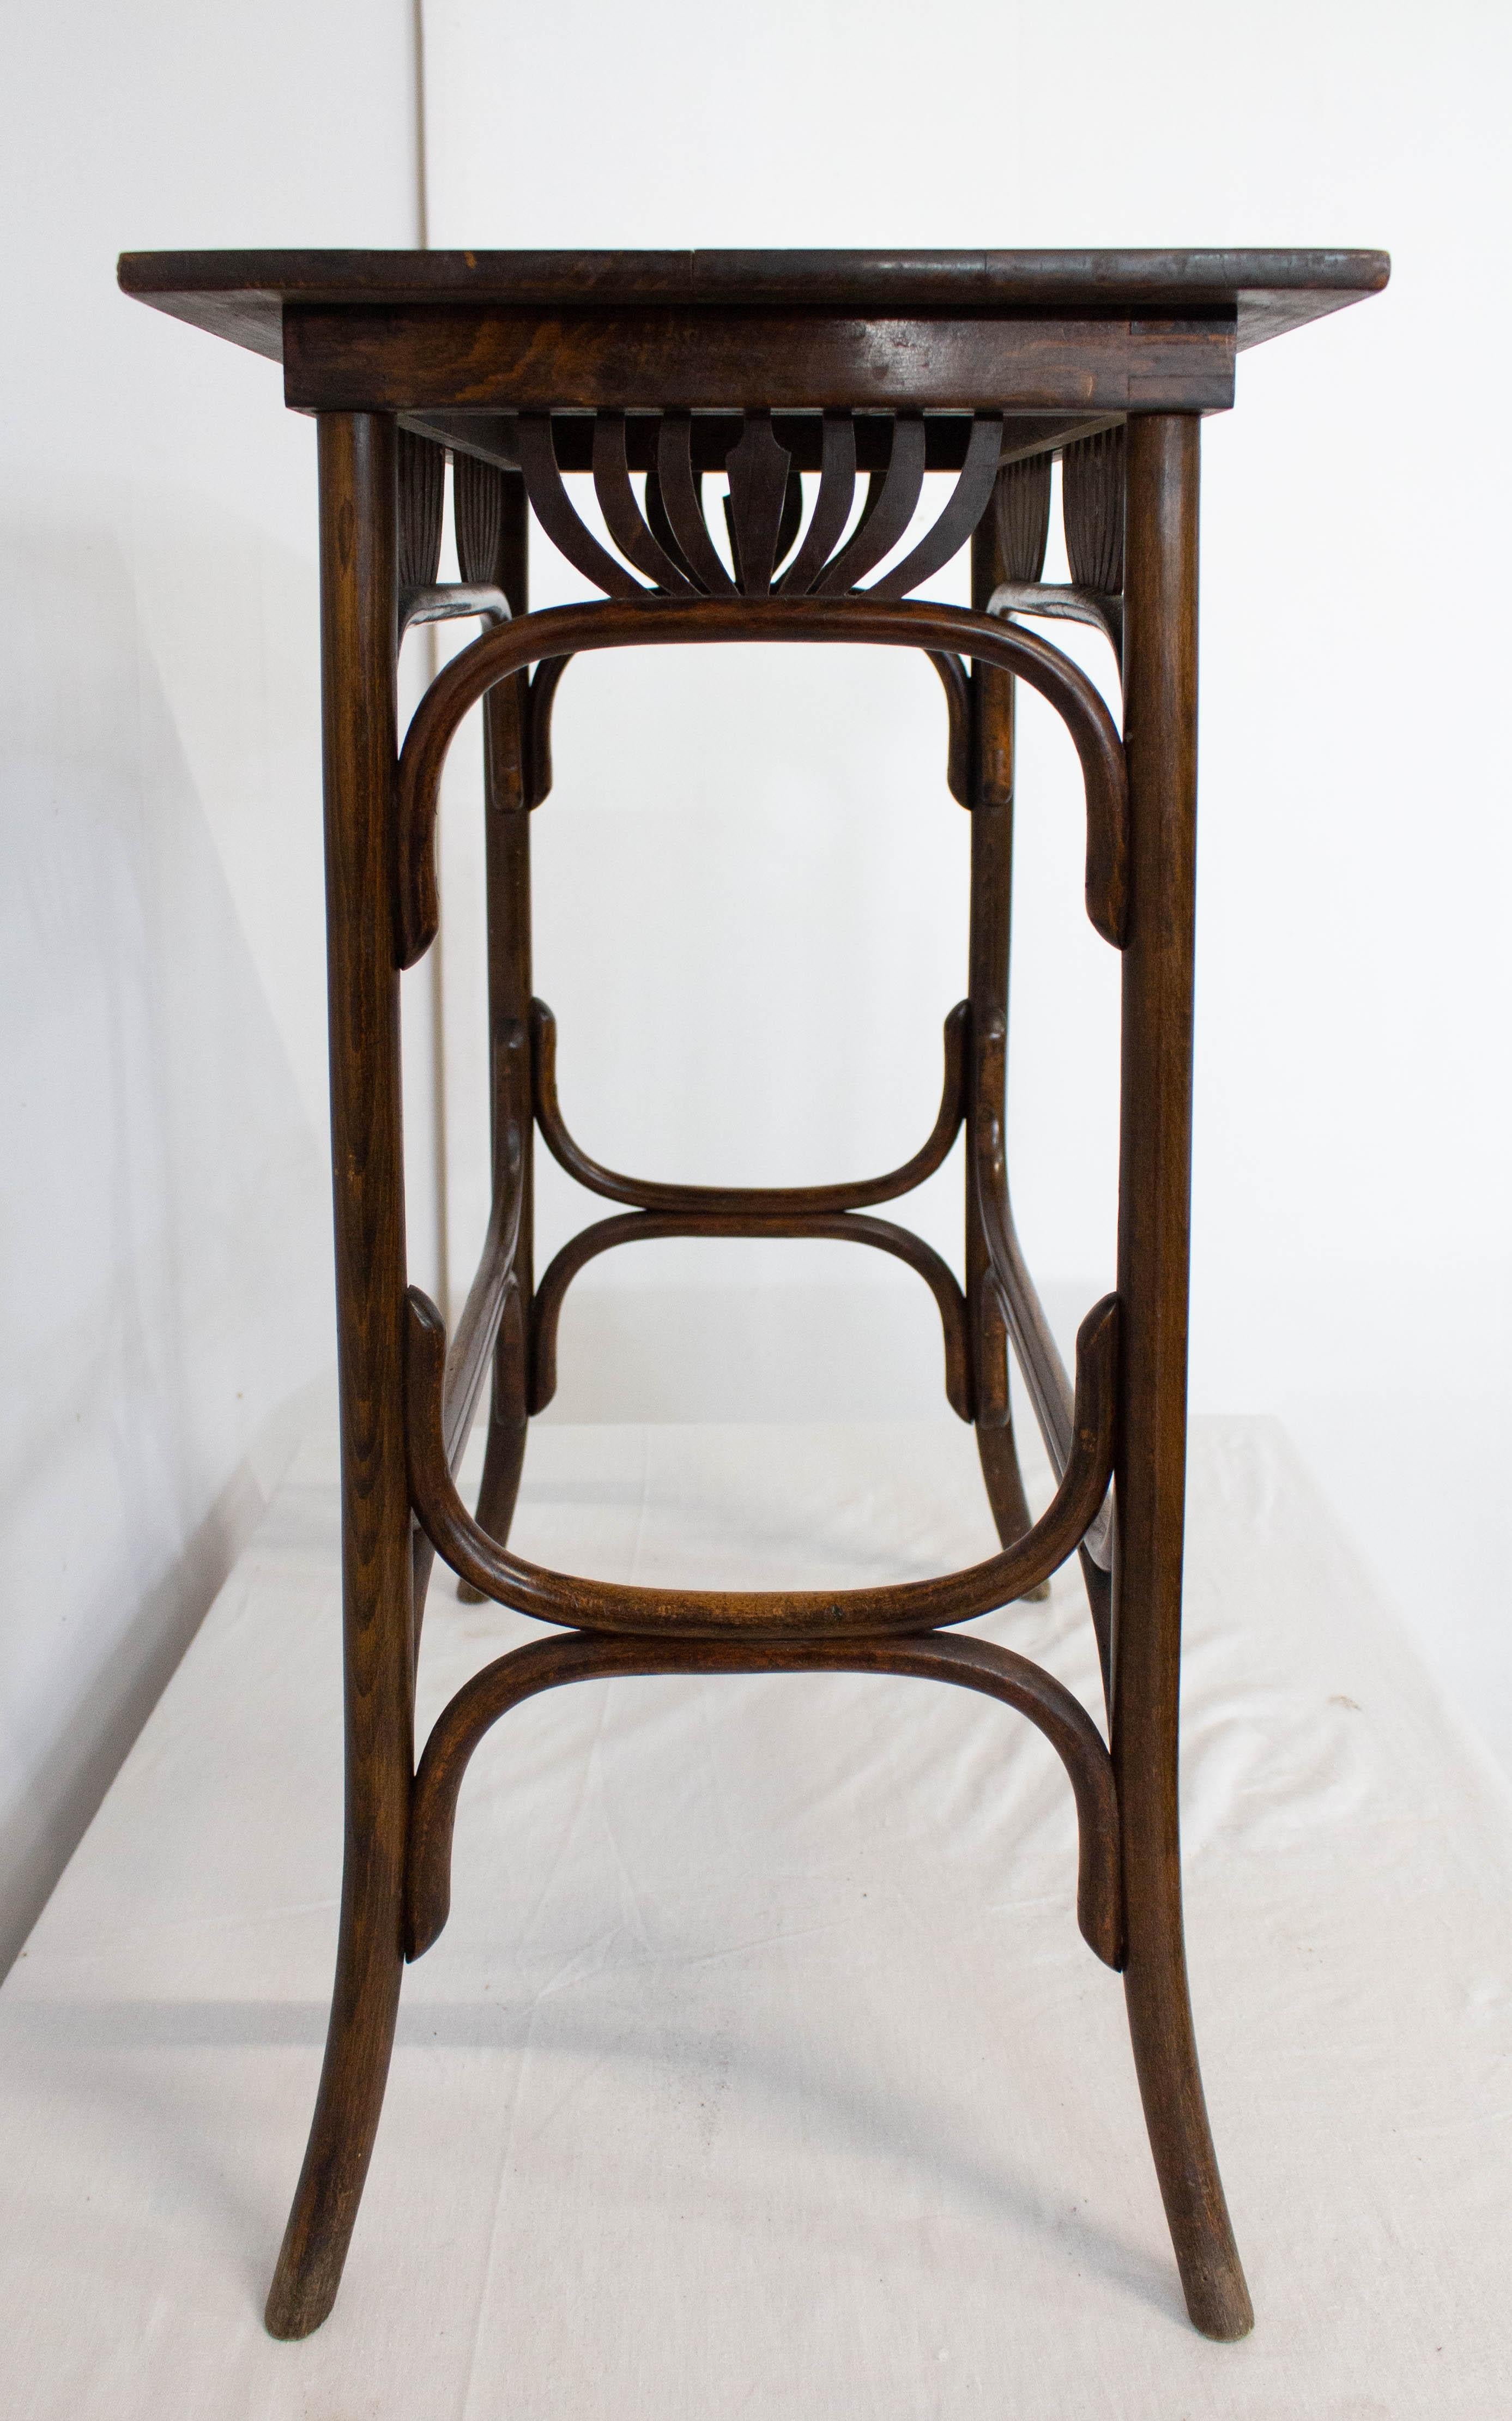 French Art Nouveau Thonet Fischel Side Table Palmettes Model, Early 20th Century